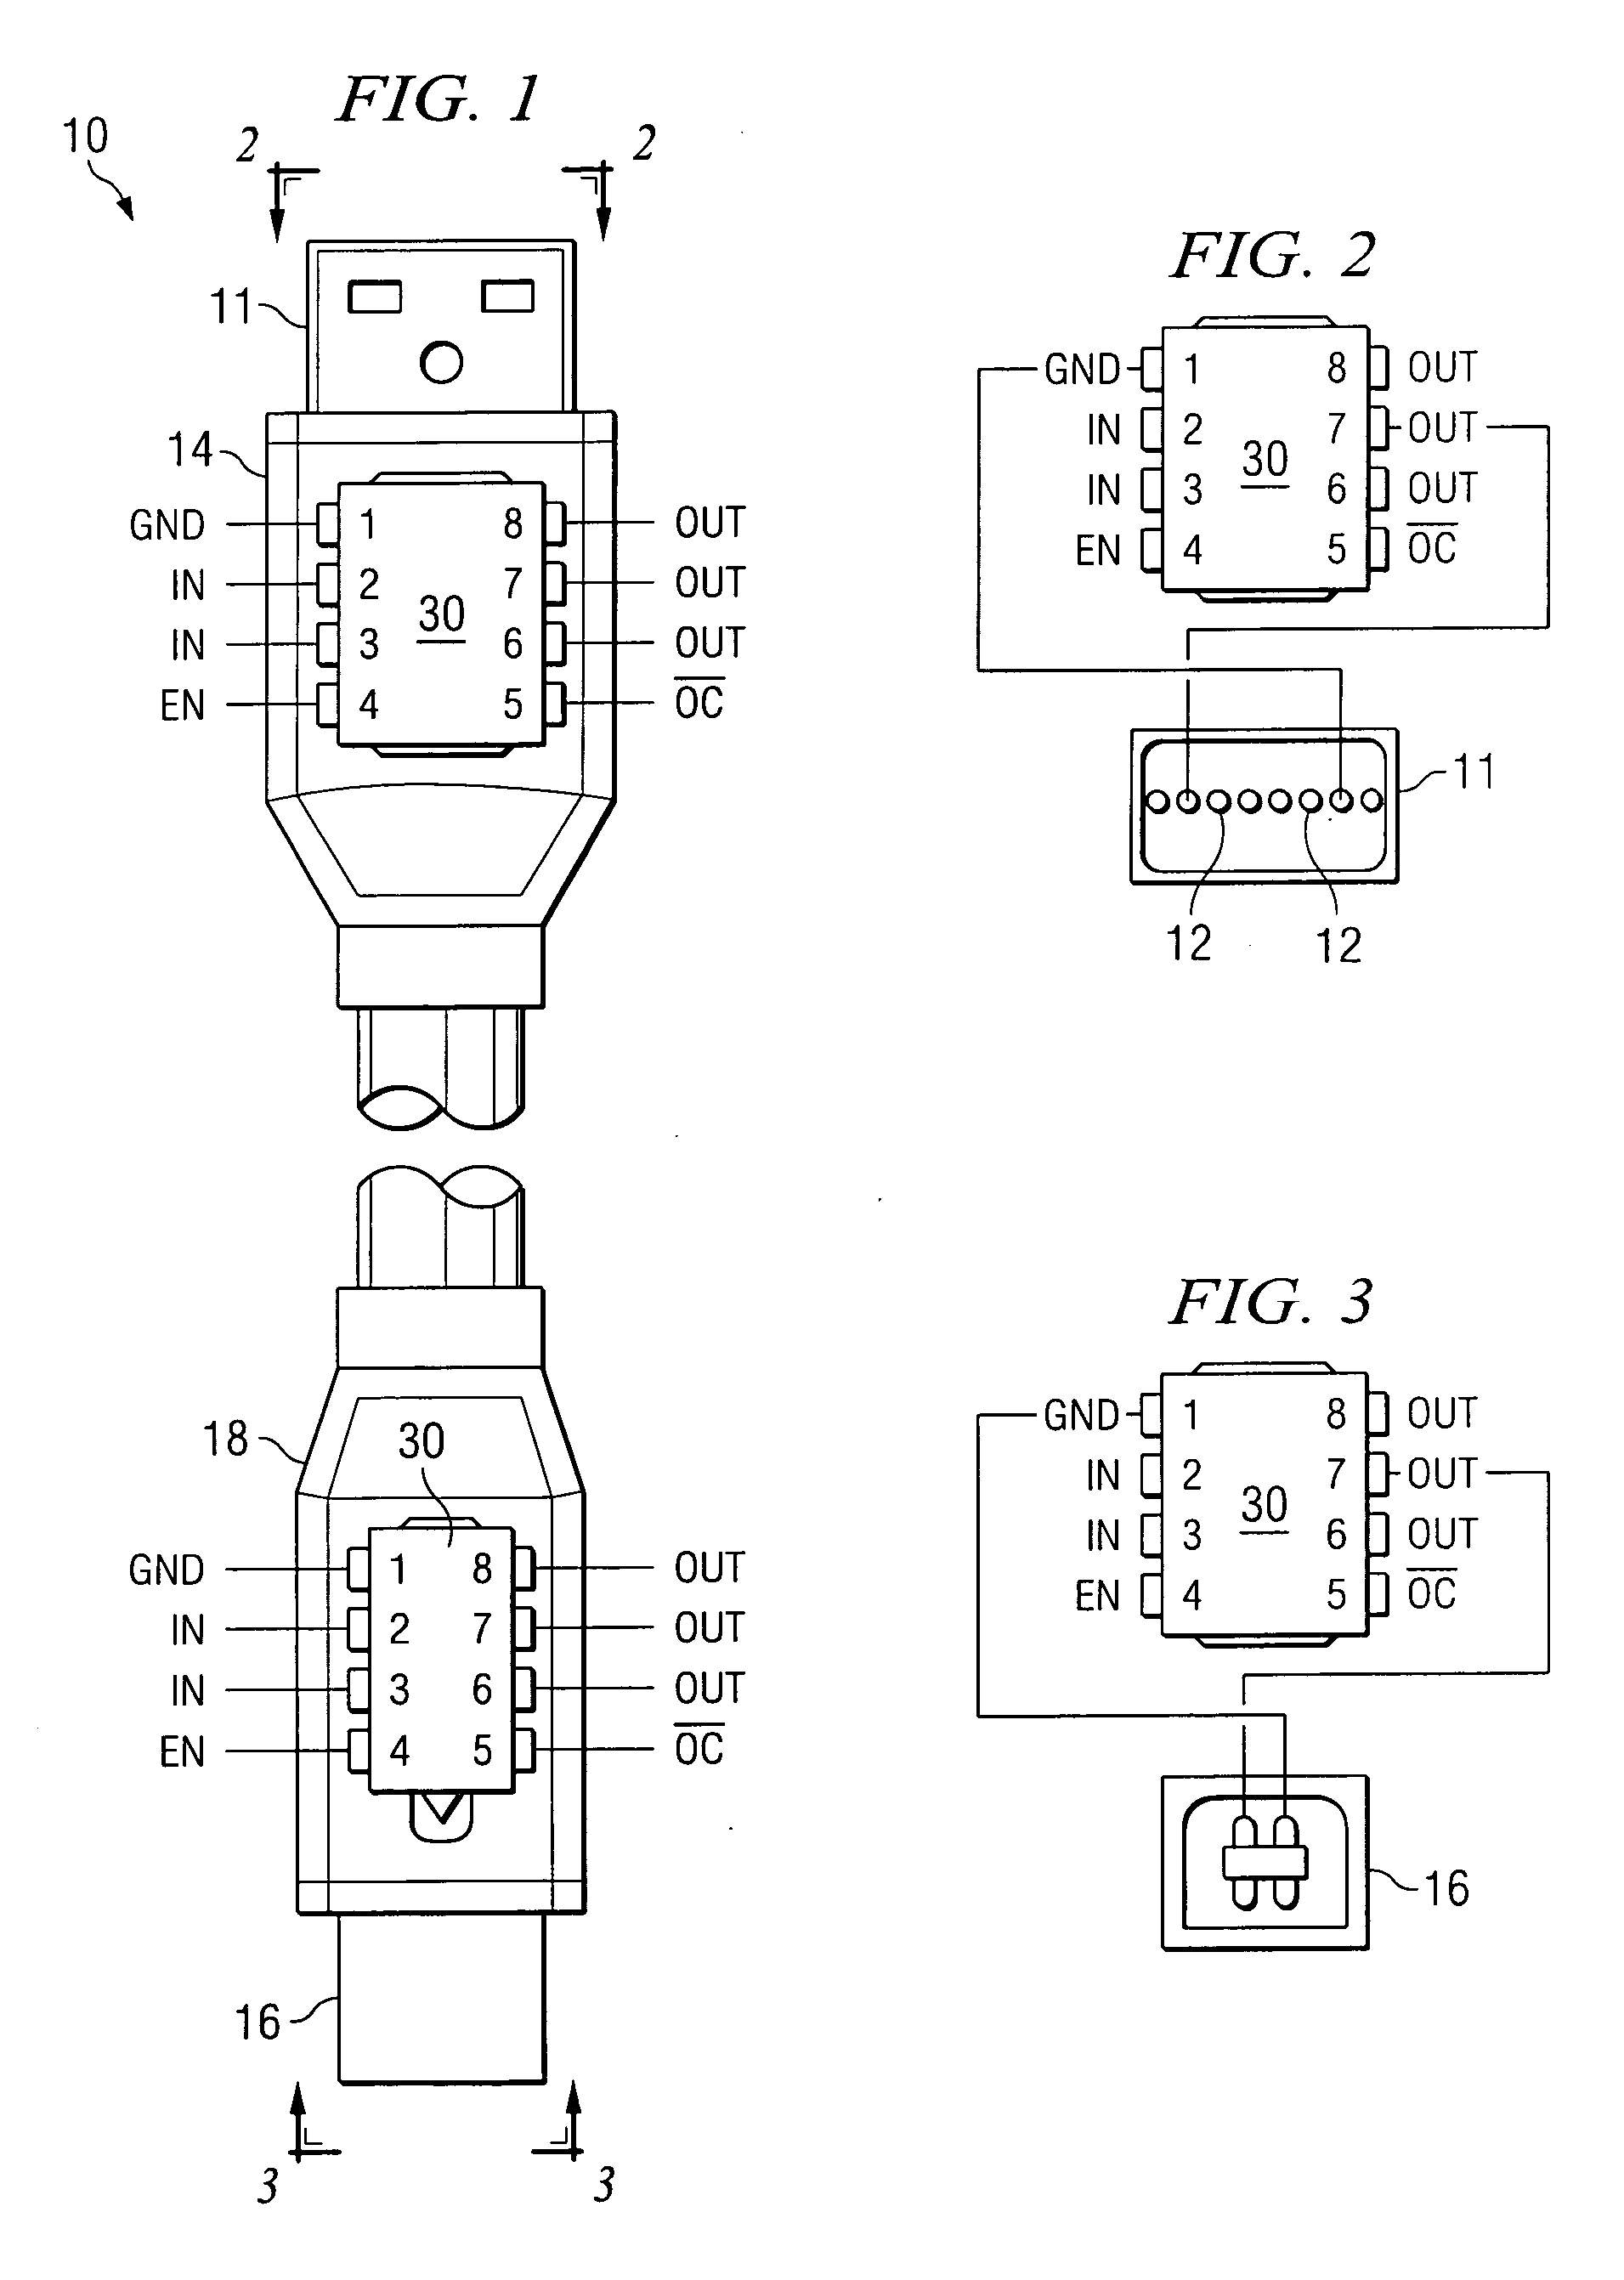 Active cable assembly for use in universal serial bus